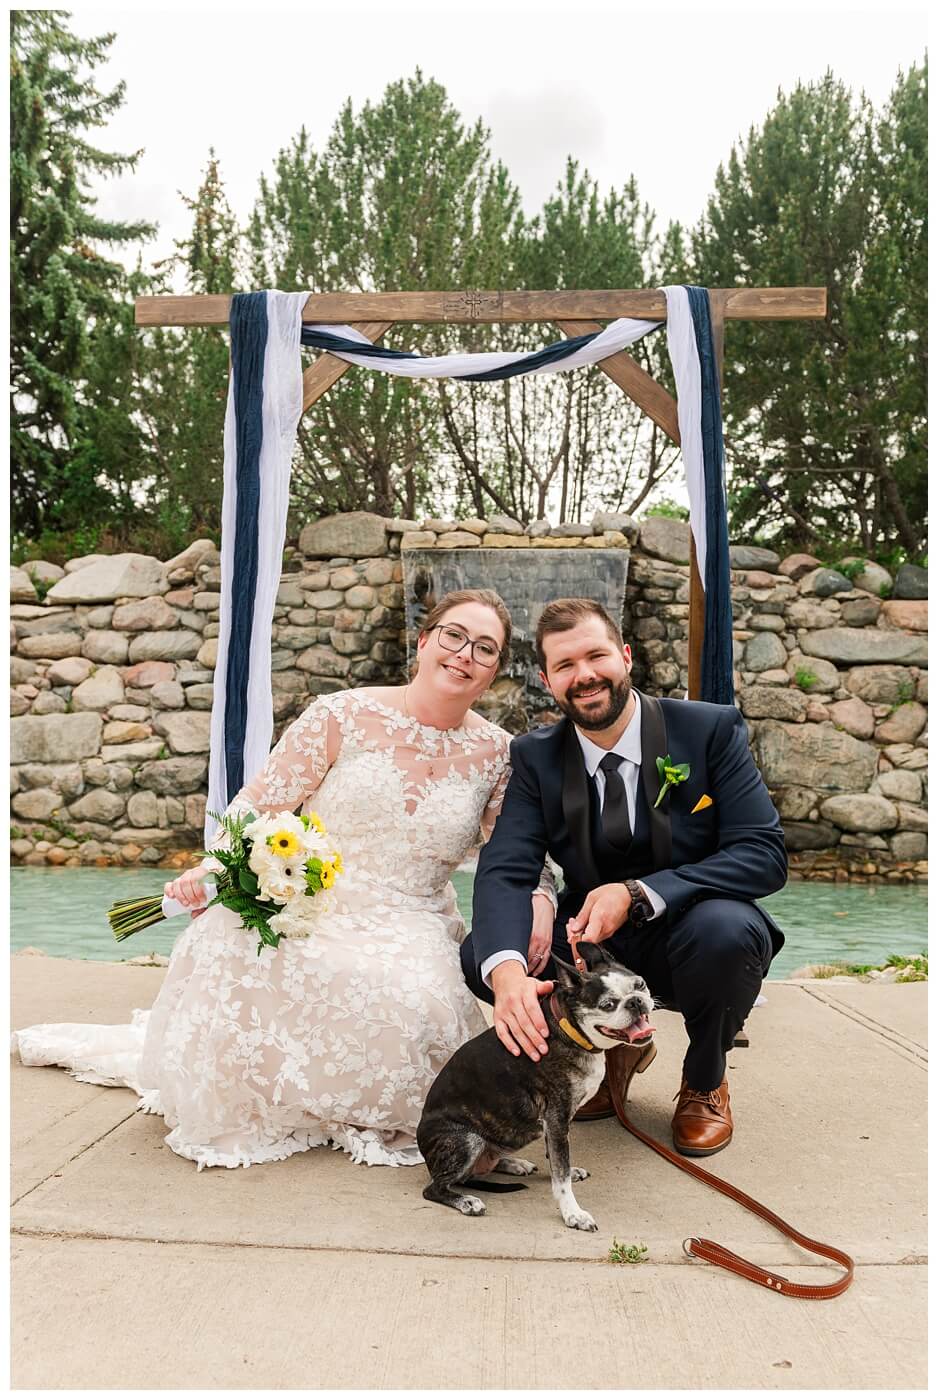 Jared & Haley - 16 - Bride and Groom with dog Gracie at Kiwanis Waterfall Park